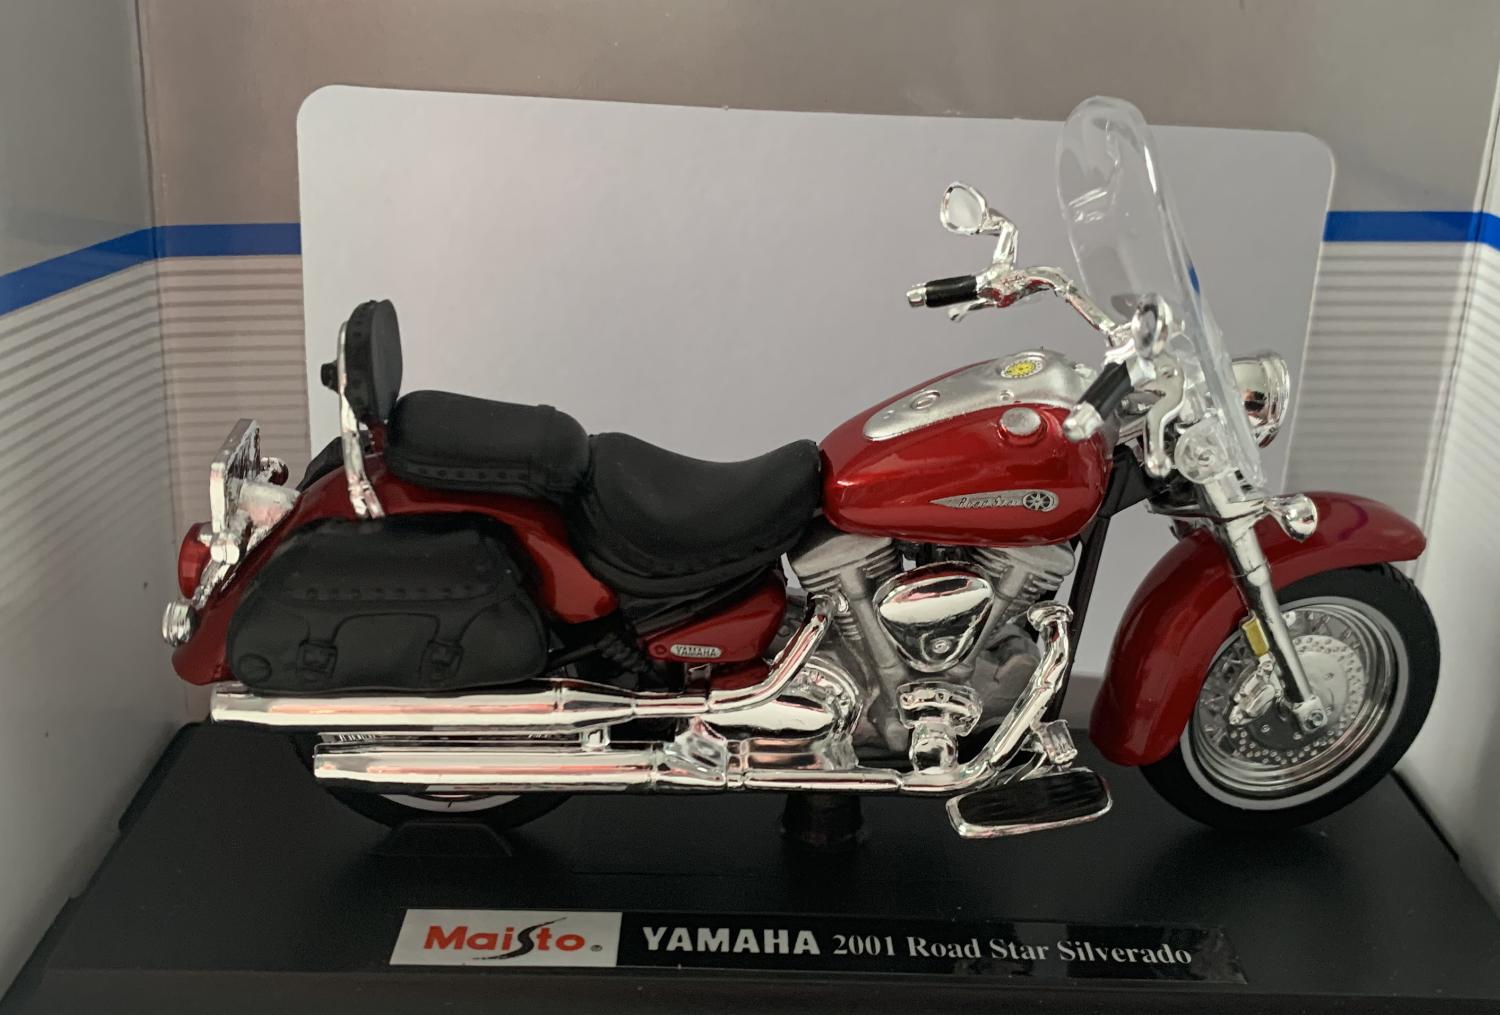 Yamaha Road Star Silverado in red 2001 1:18 scale model from Maisto